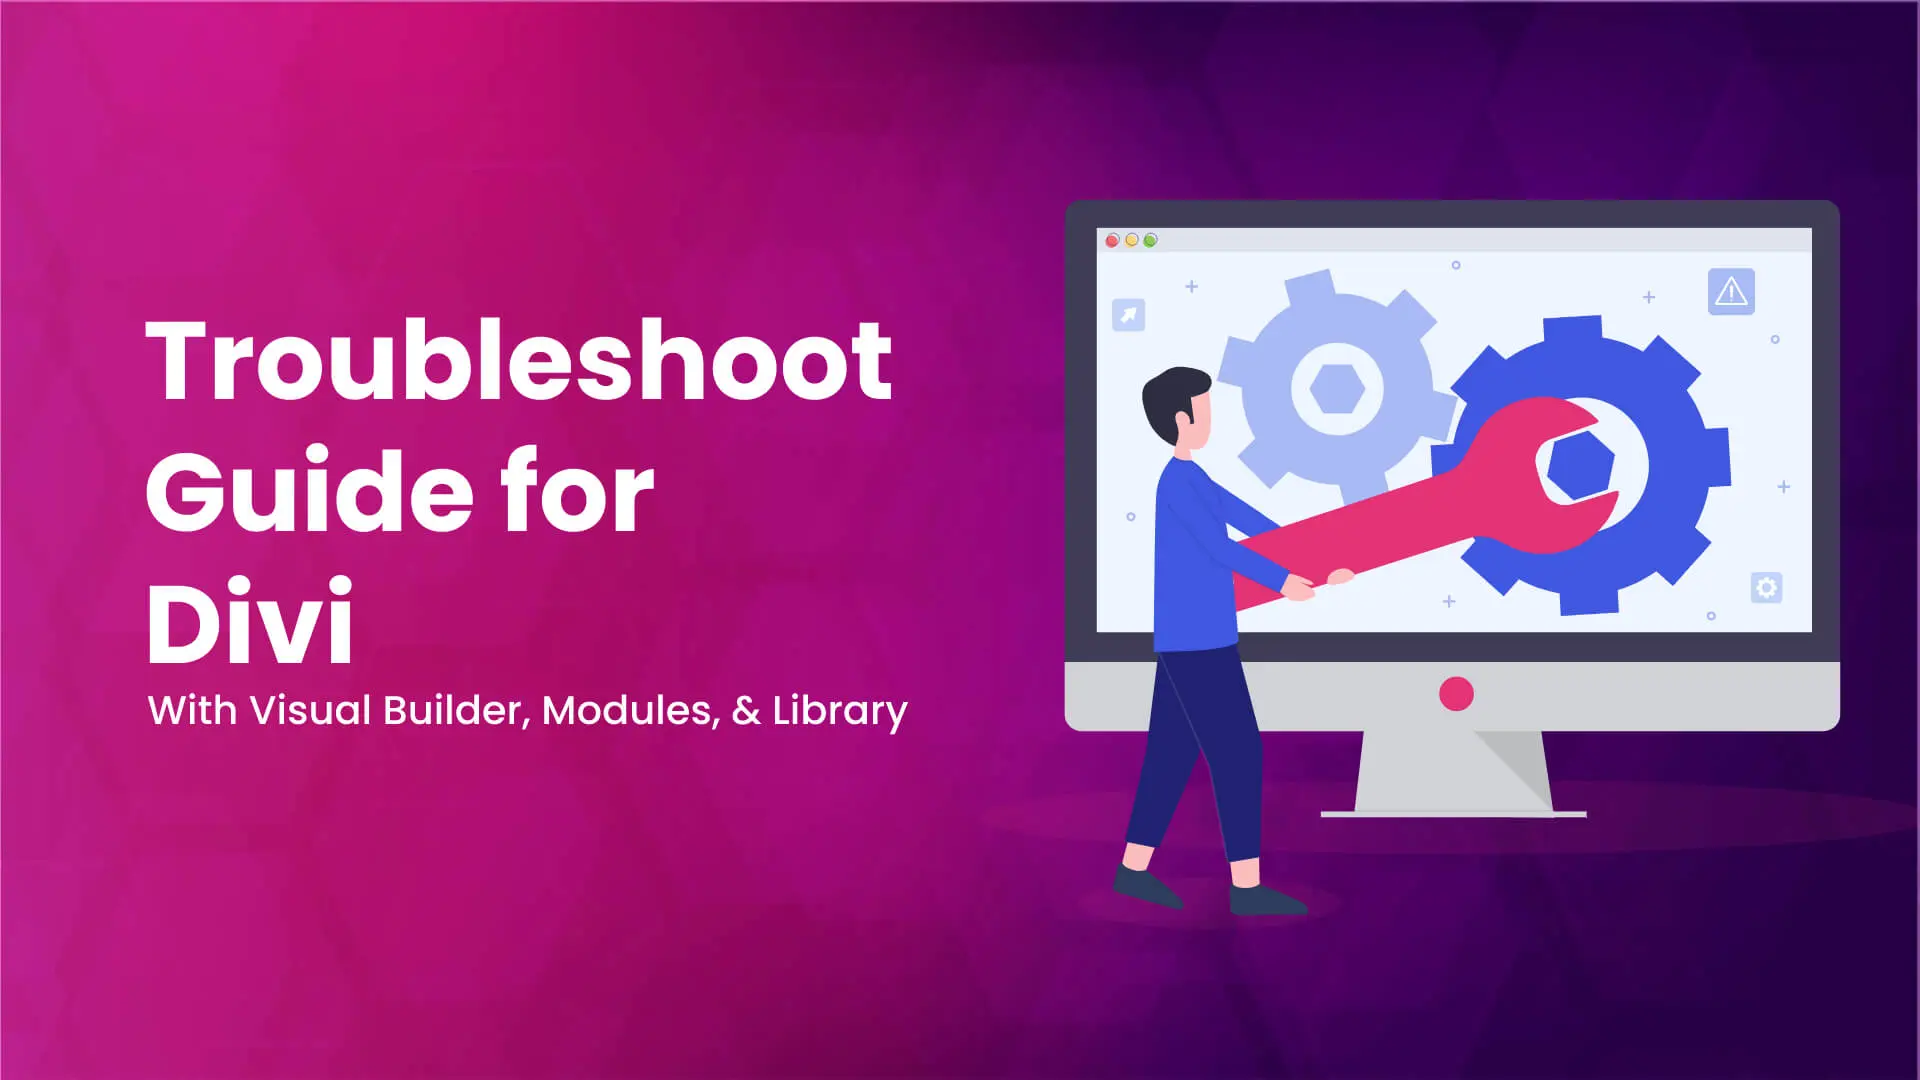 Troubleshoot guide for Divi